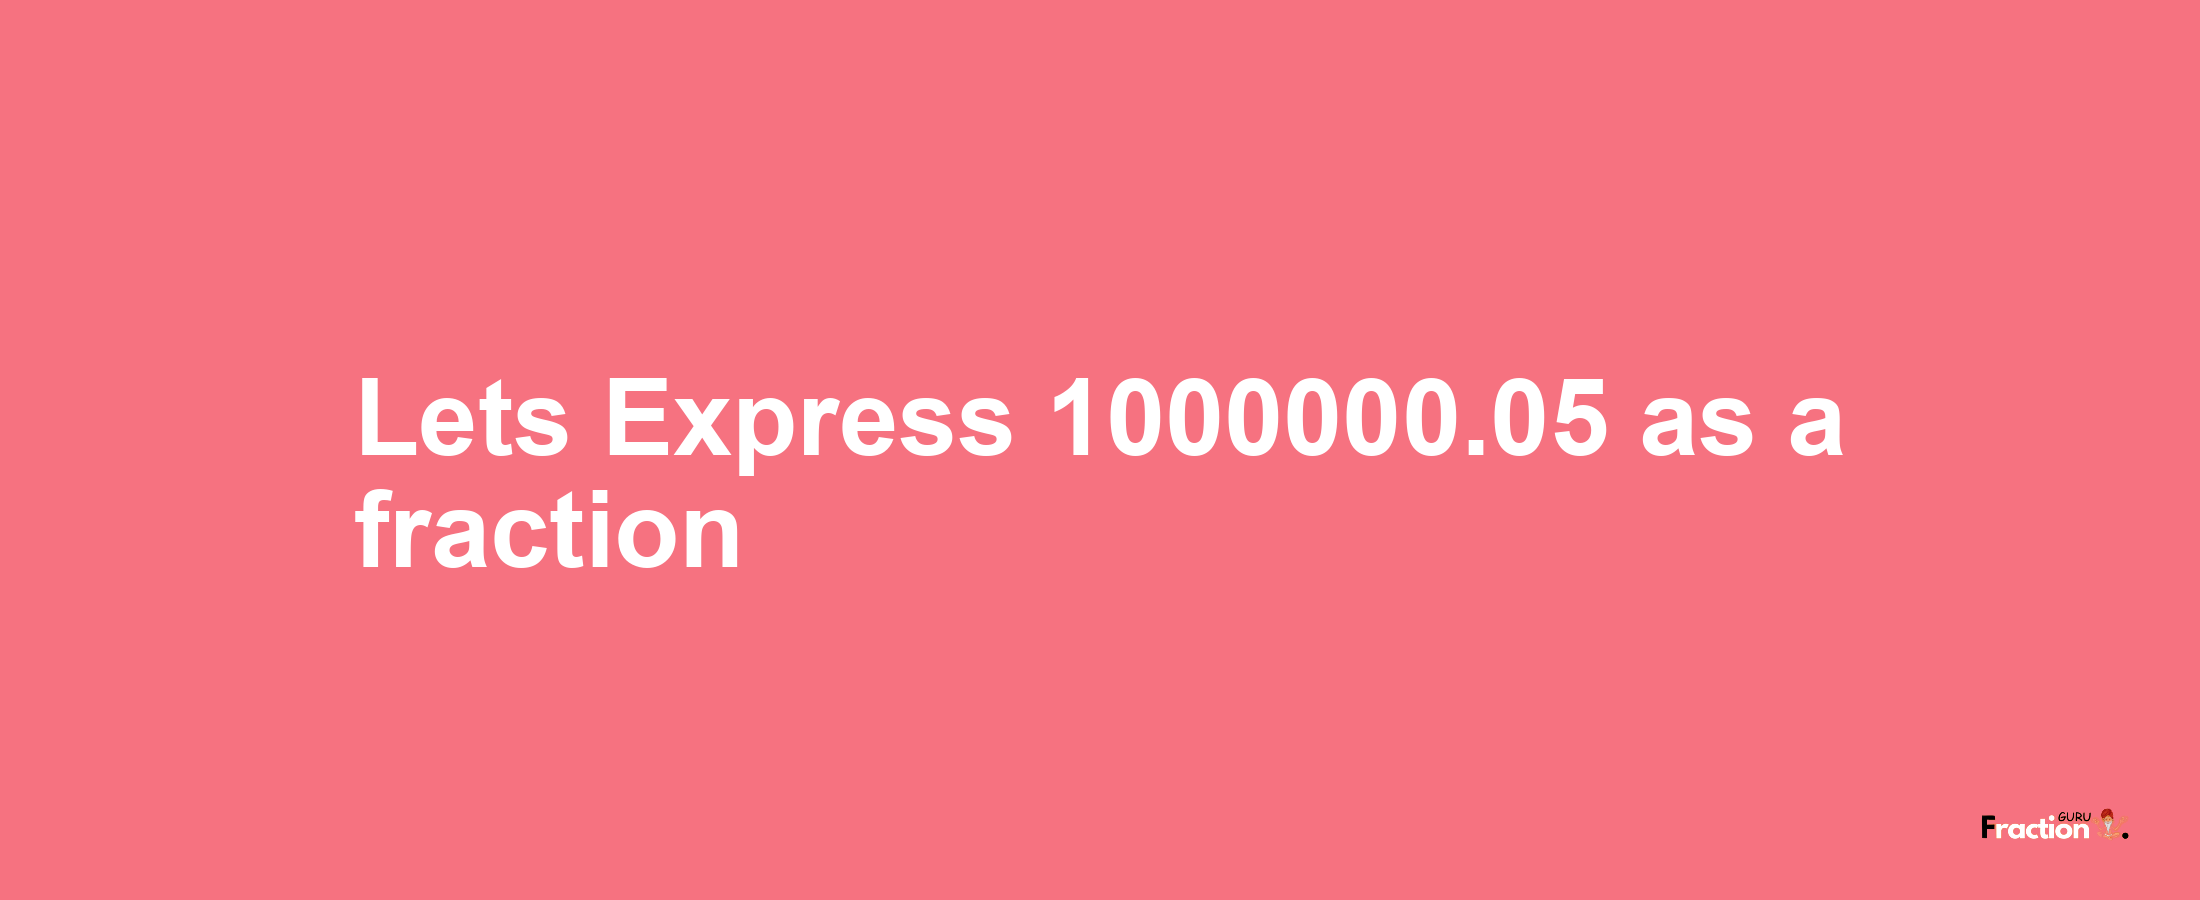 Lets Express 1000000.05 as afraction